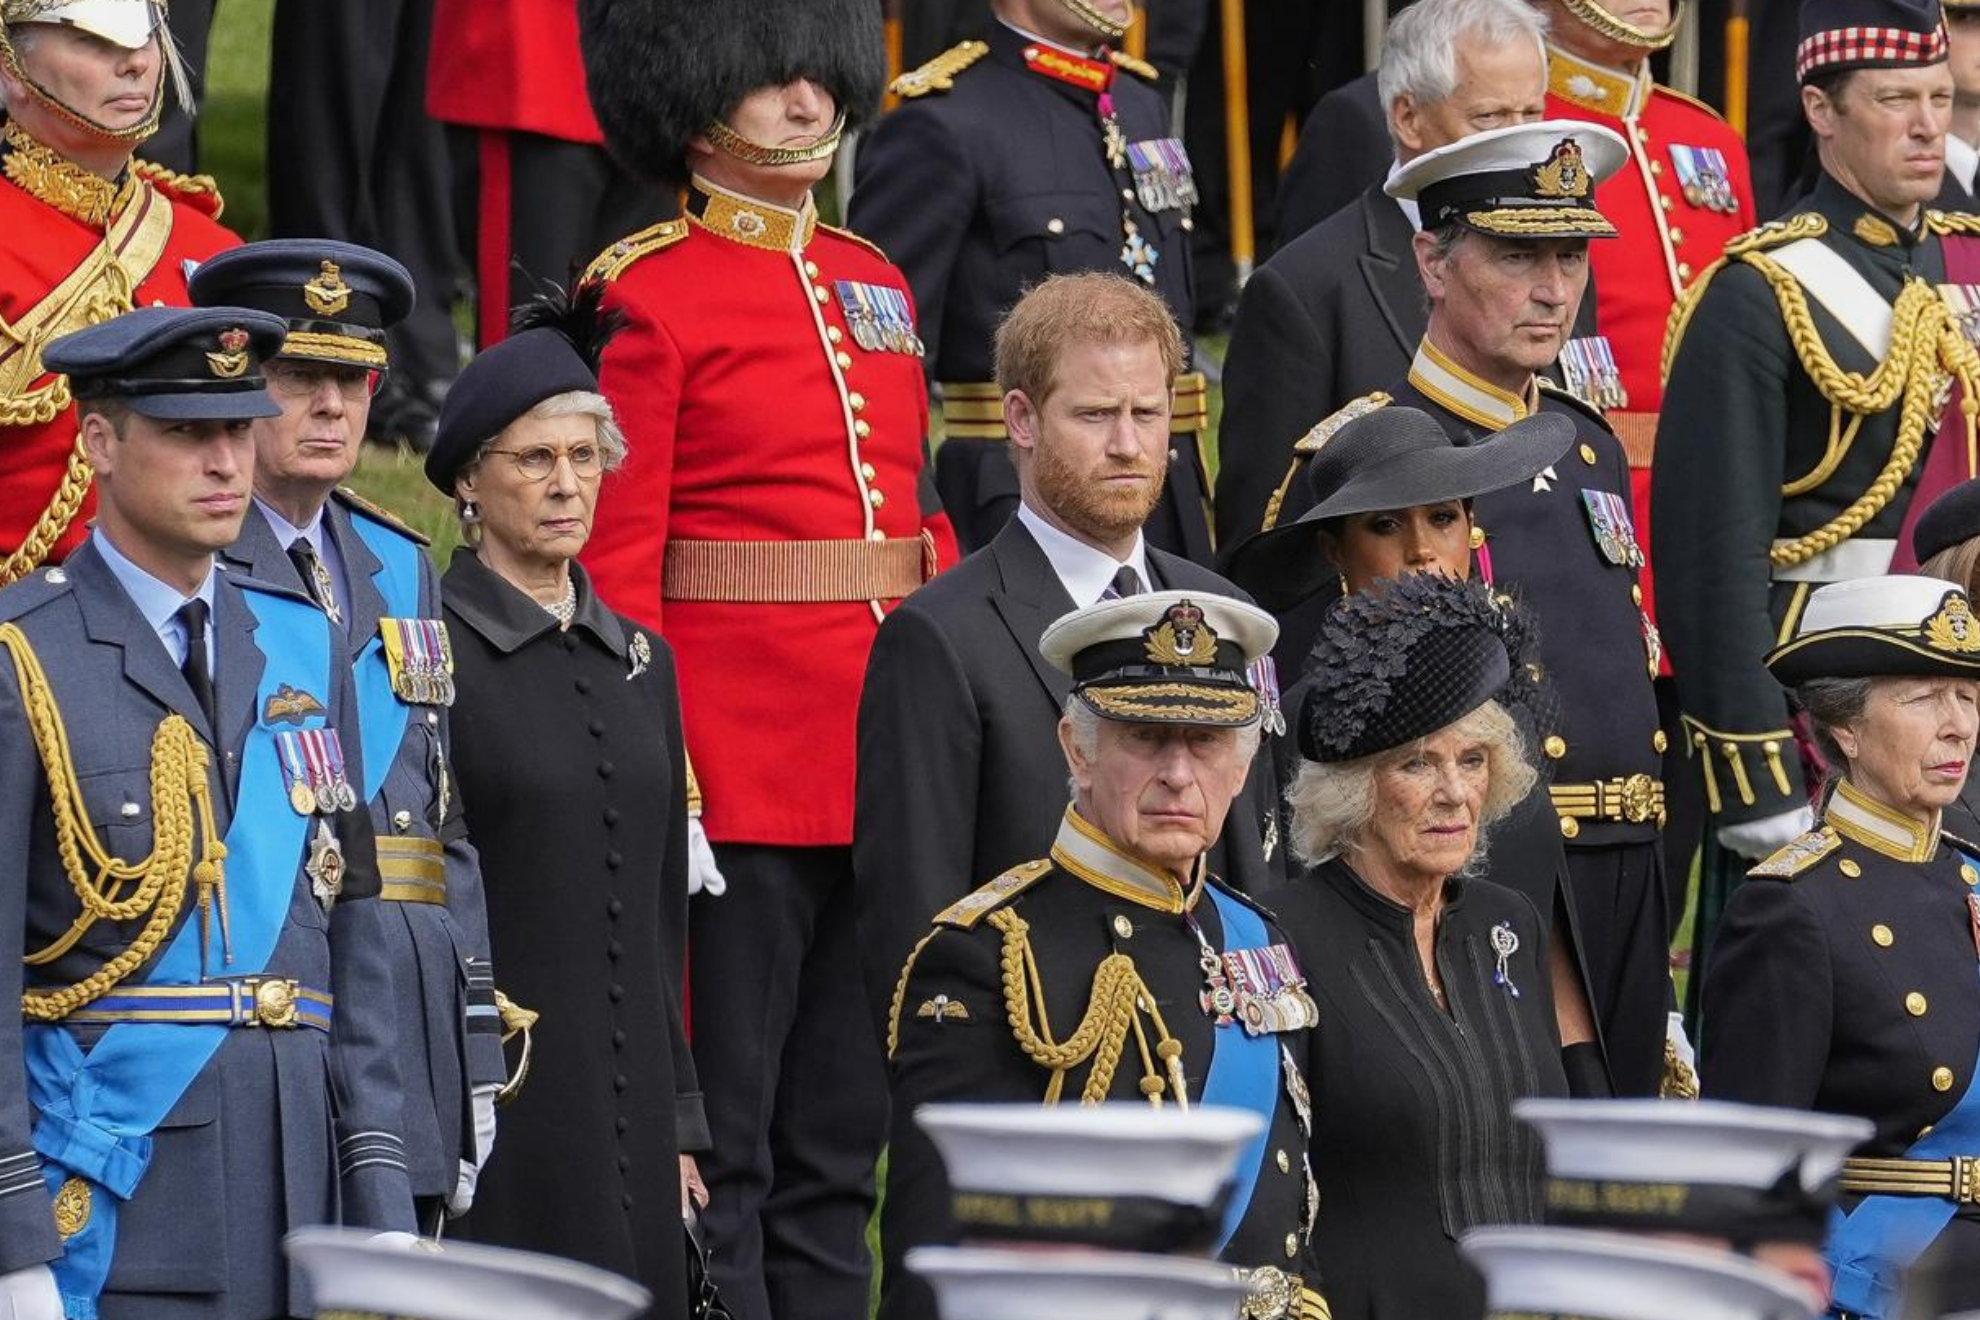 Prince Harry behind his father, King Charles III. - AP Photo/Martin Meissner, Pool